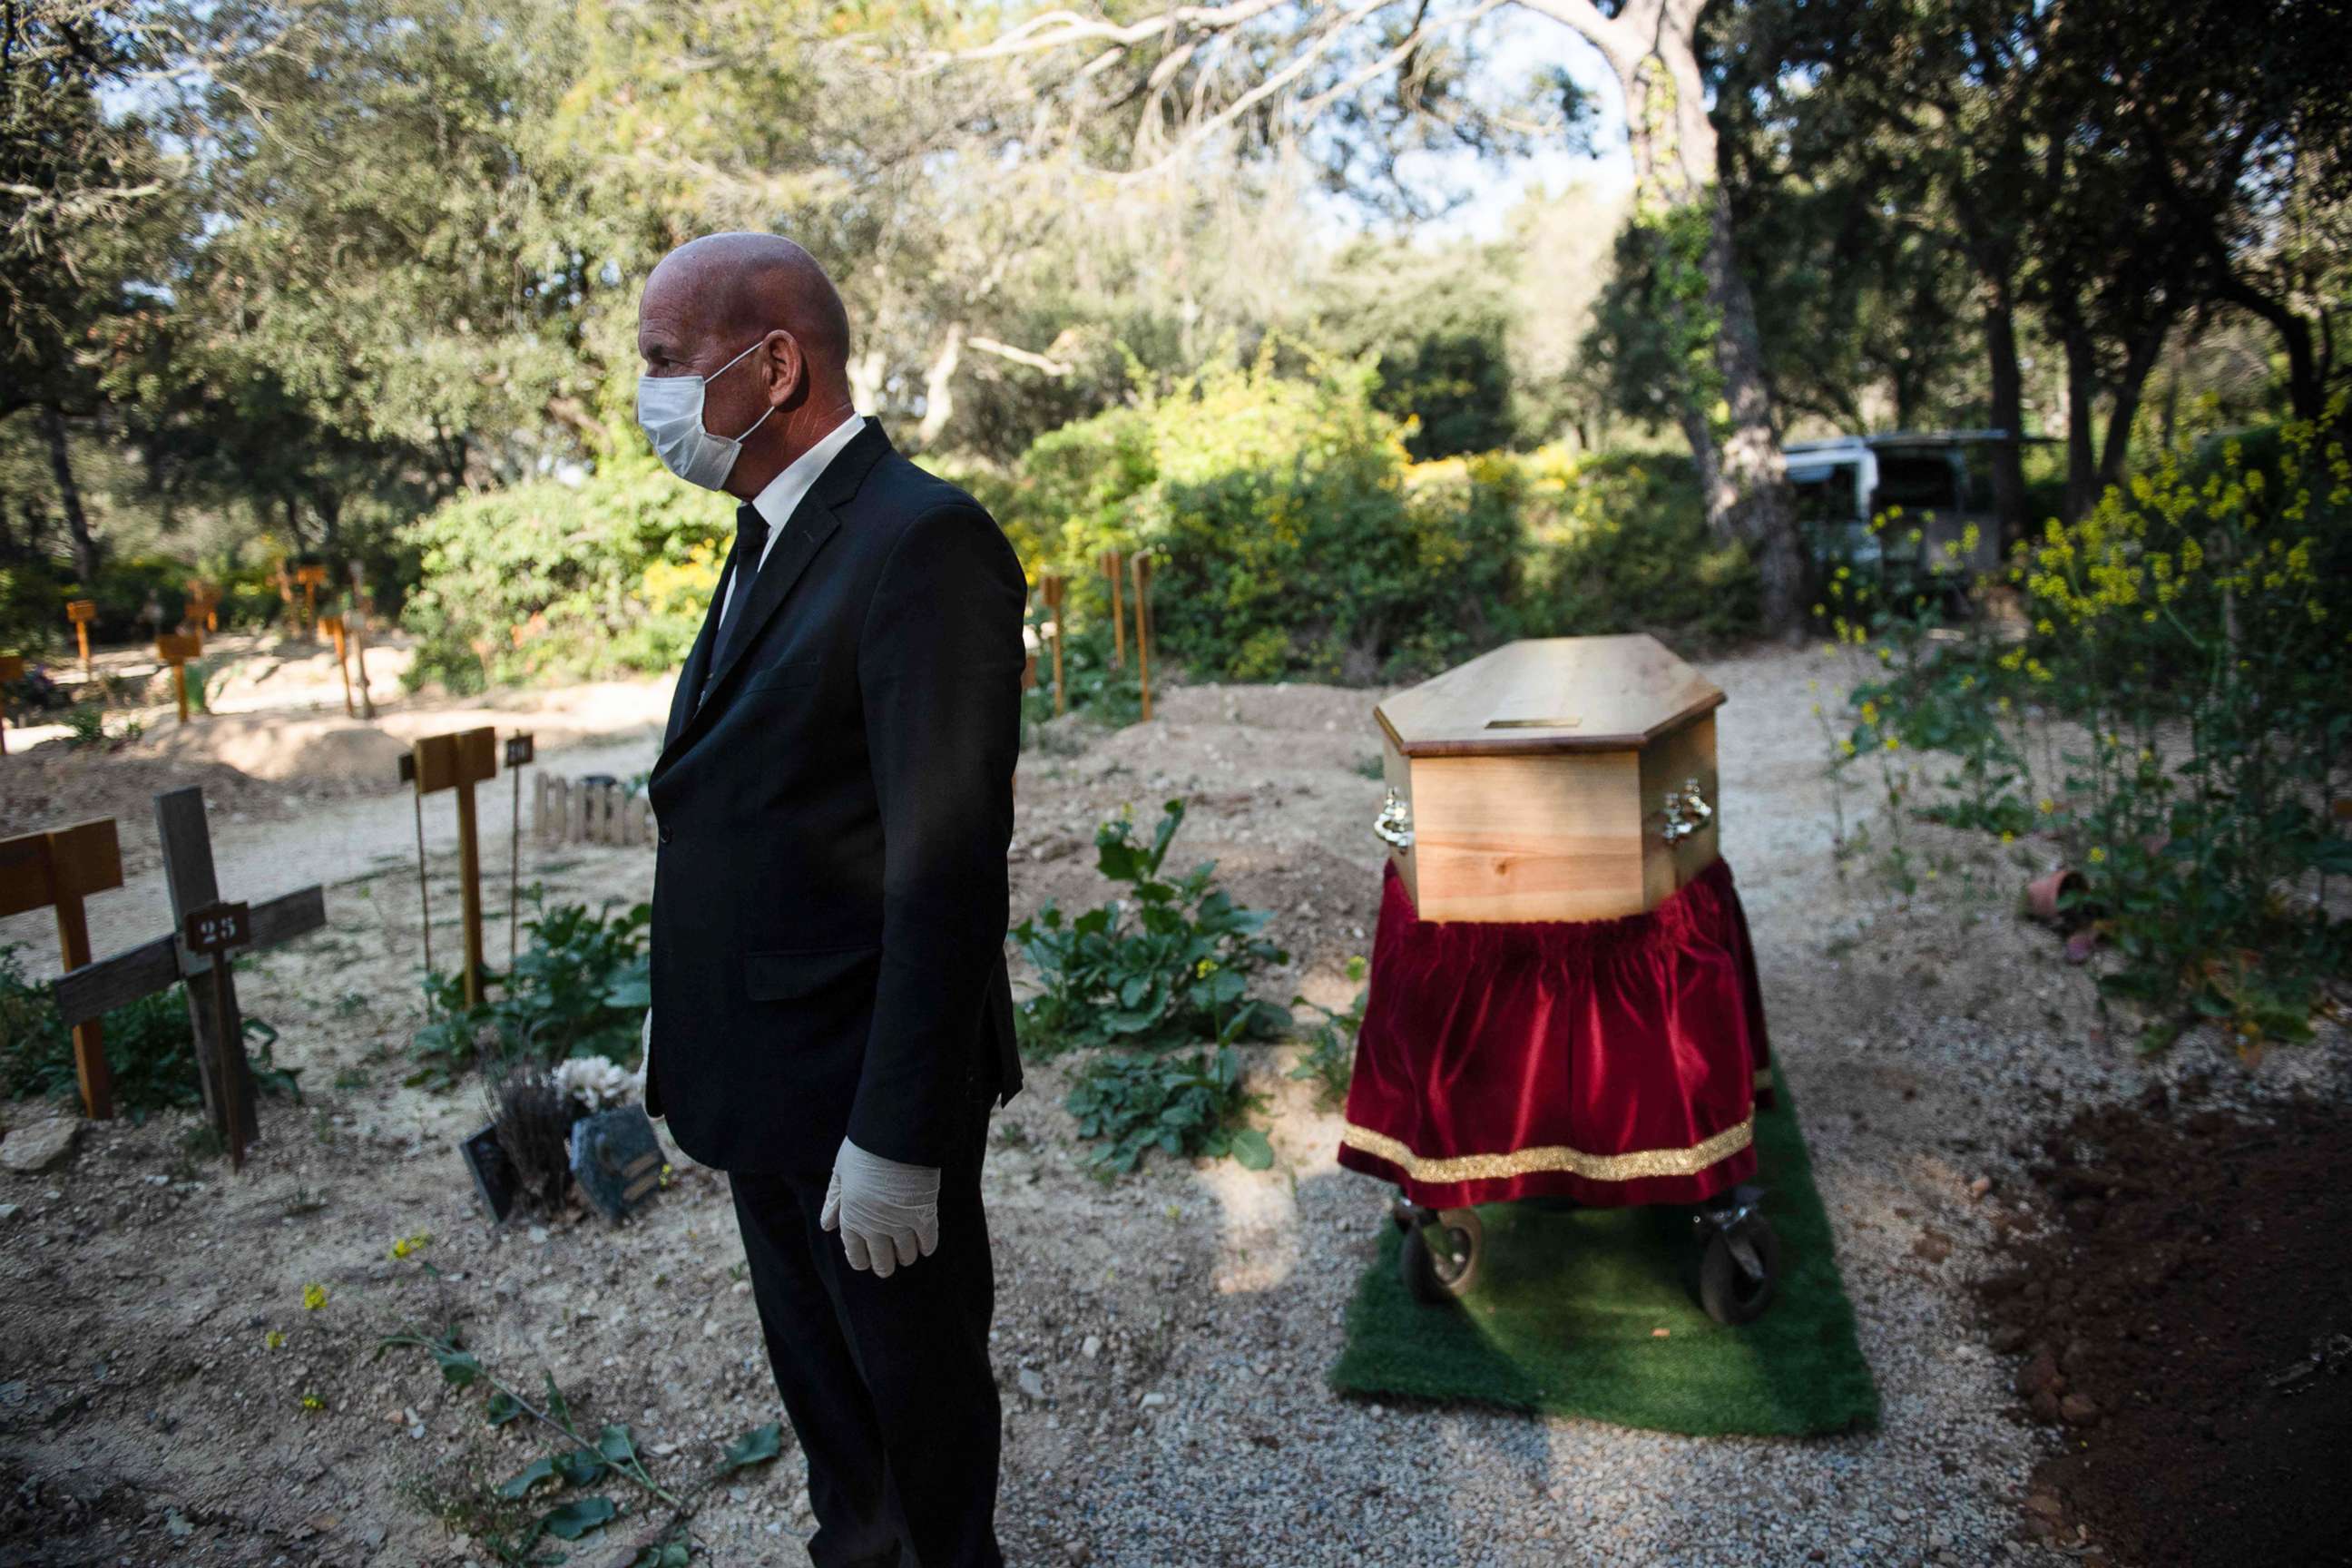 PHOTO: An undertaker wearing a protective mask amid the outbreak of the COVID-19, takes part in the burial ceremony of a man at the Aix-en-Provence cemetery, southern France, on April 7, 2020.